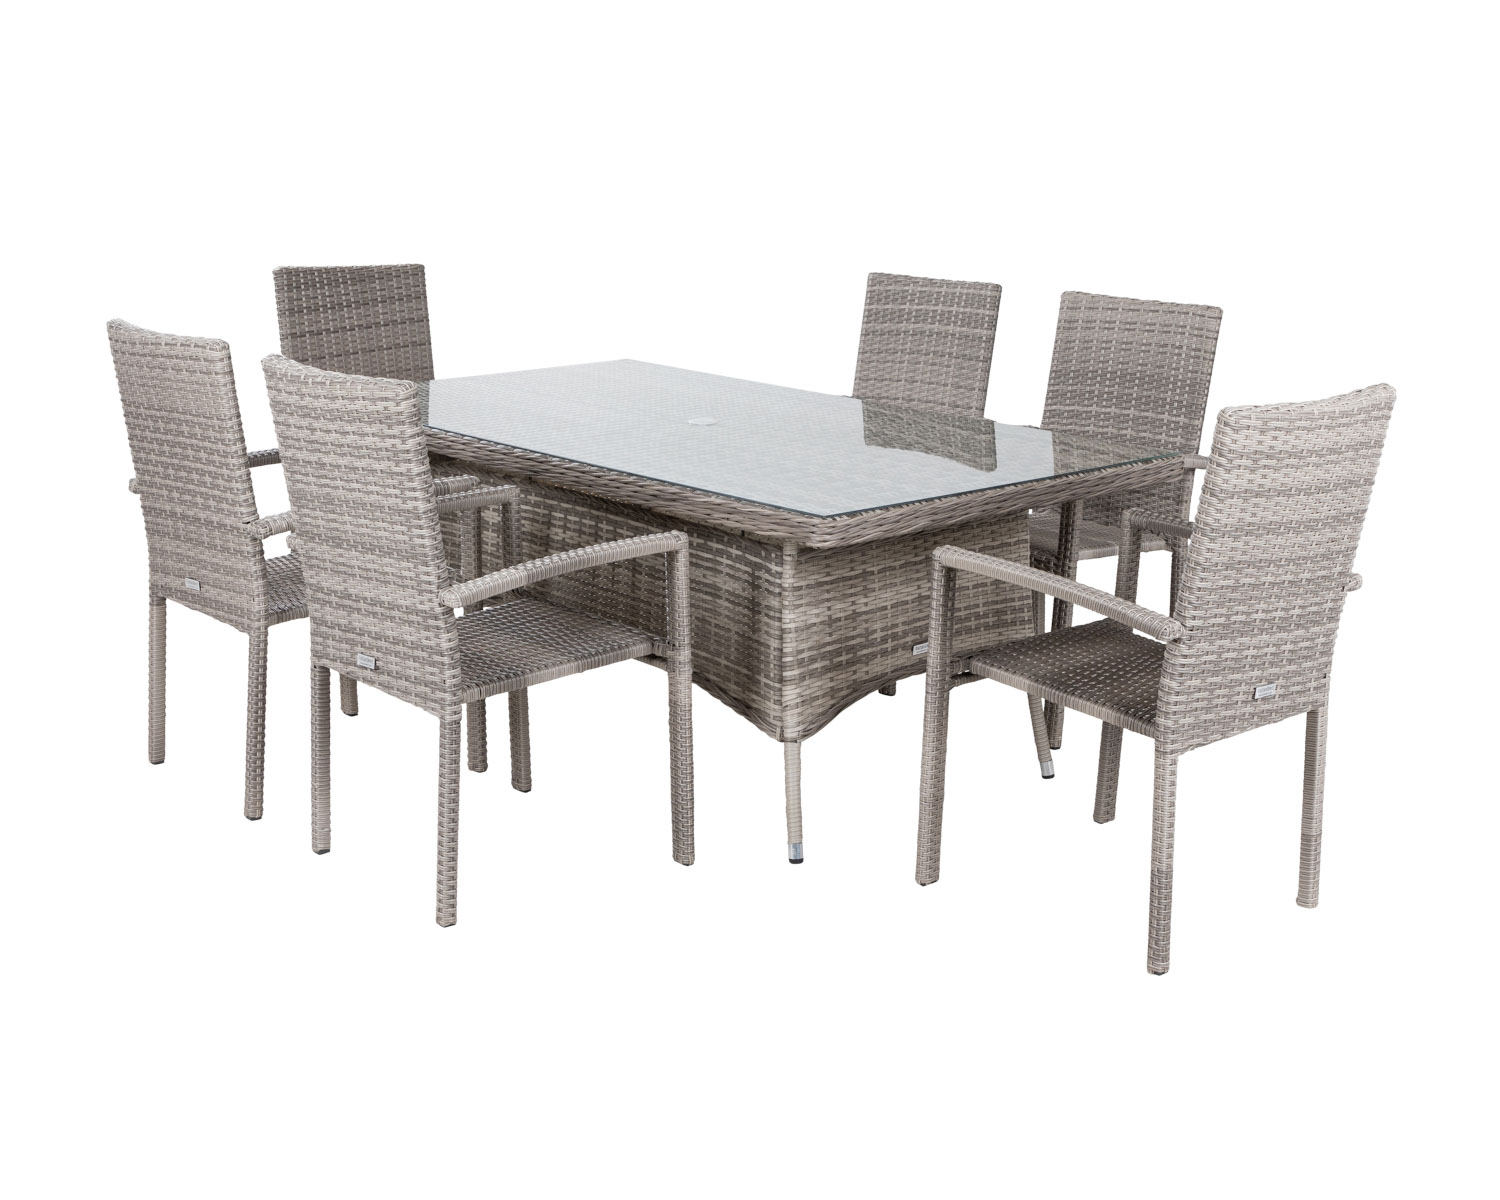 6 Seat Rattan Garden Dining Set With Rectangular Table In Grey Rio Rattan Direct